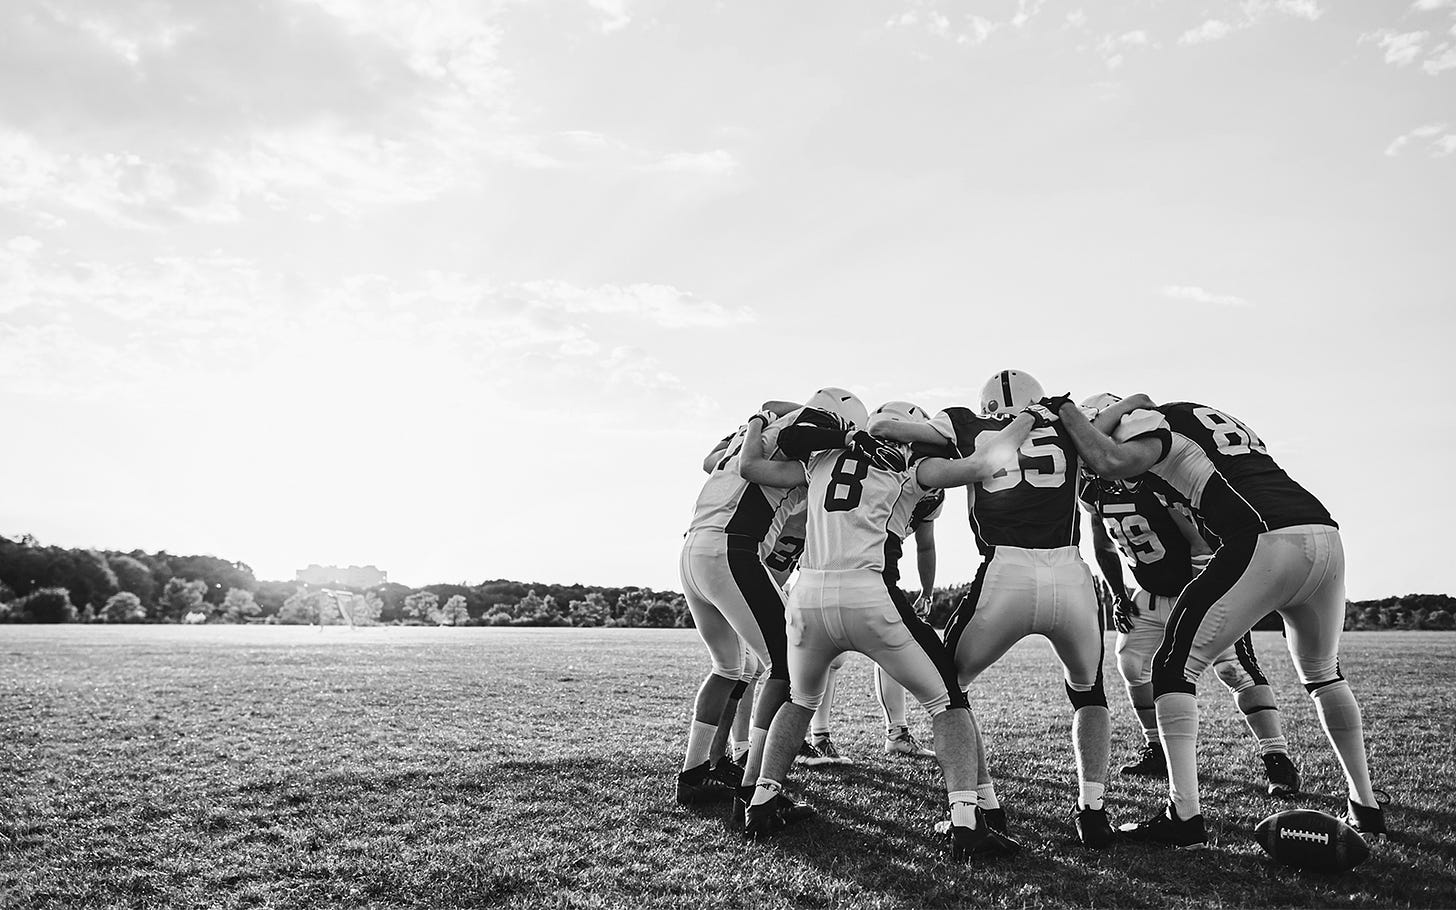 Team of football players huddle on an empty grass field. The sun sits on the horizon bathing the field in glorious light.